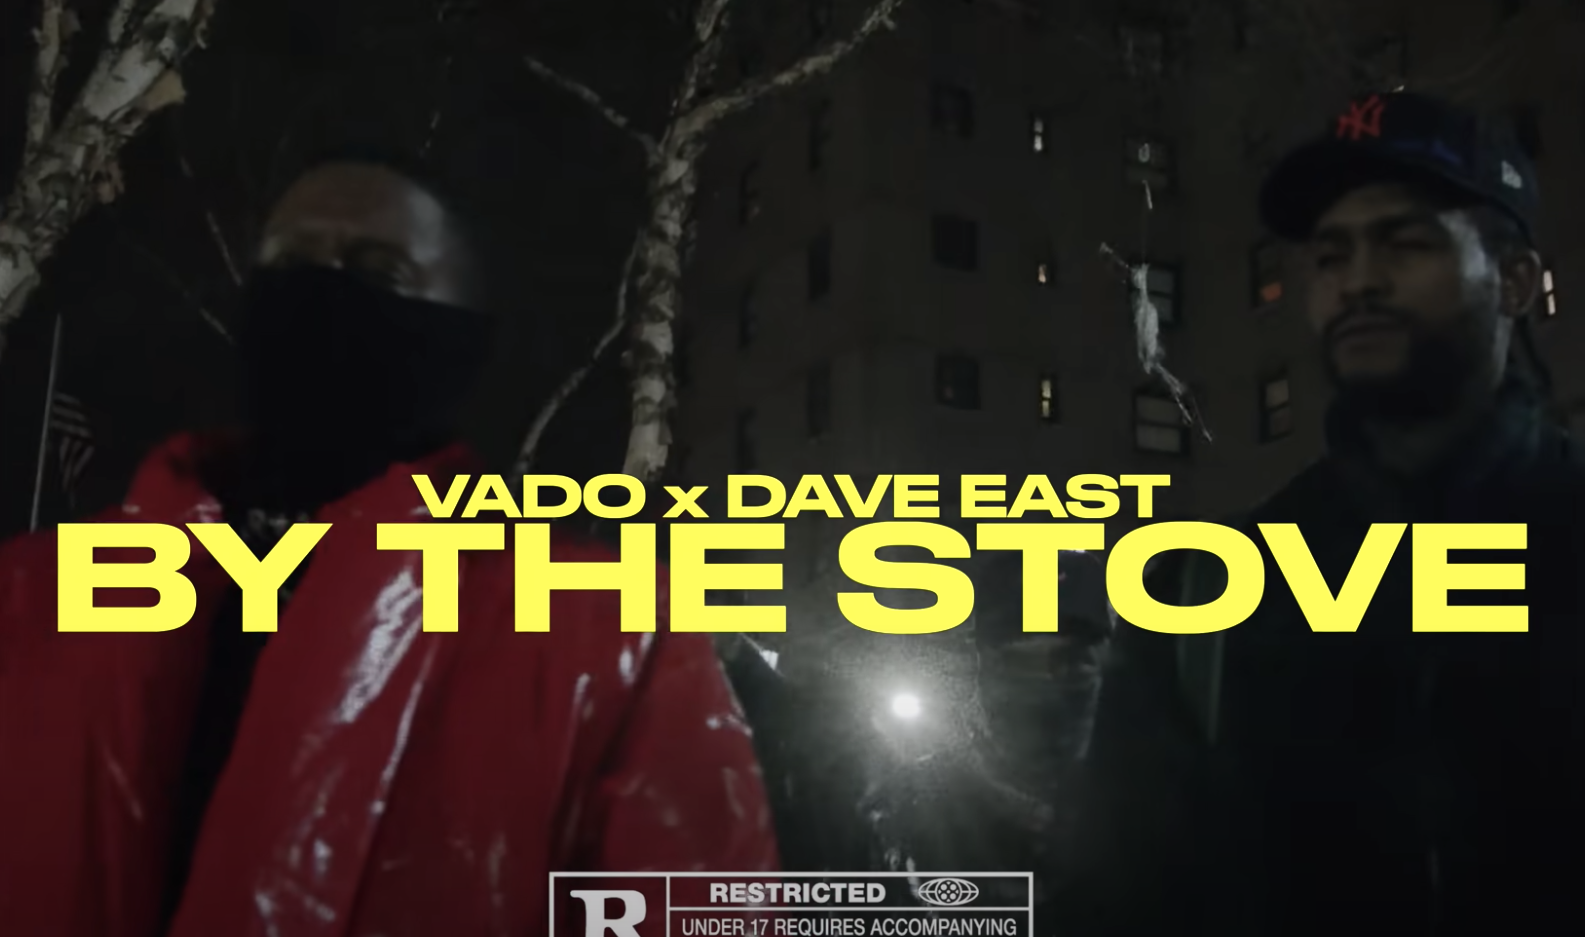 Vado by the stove